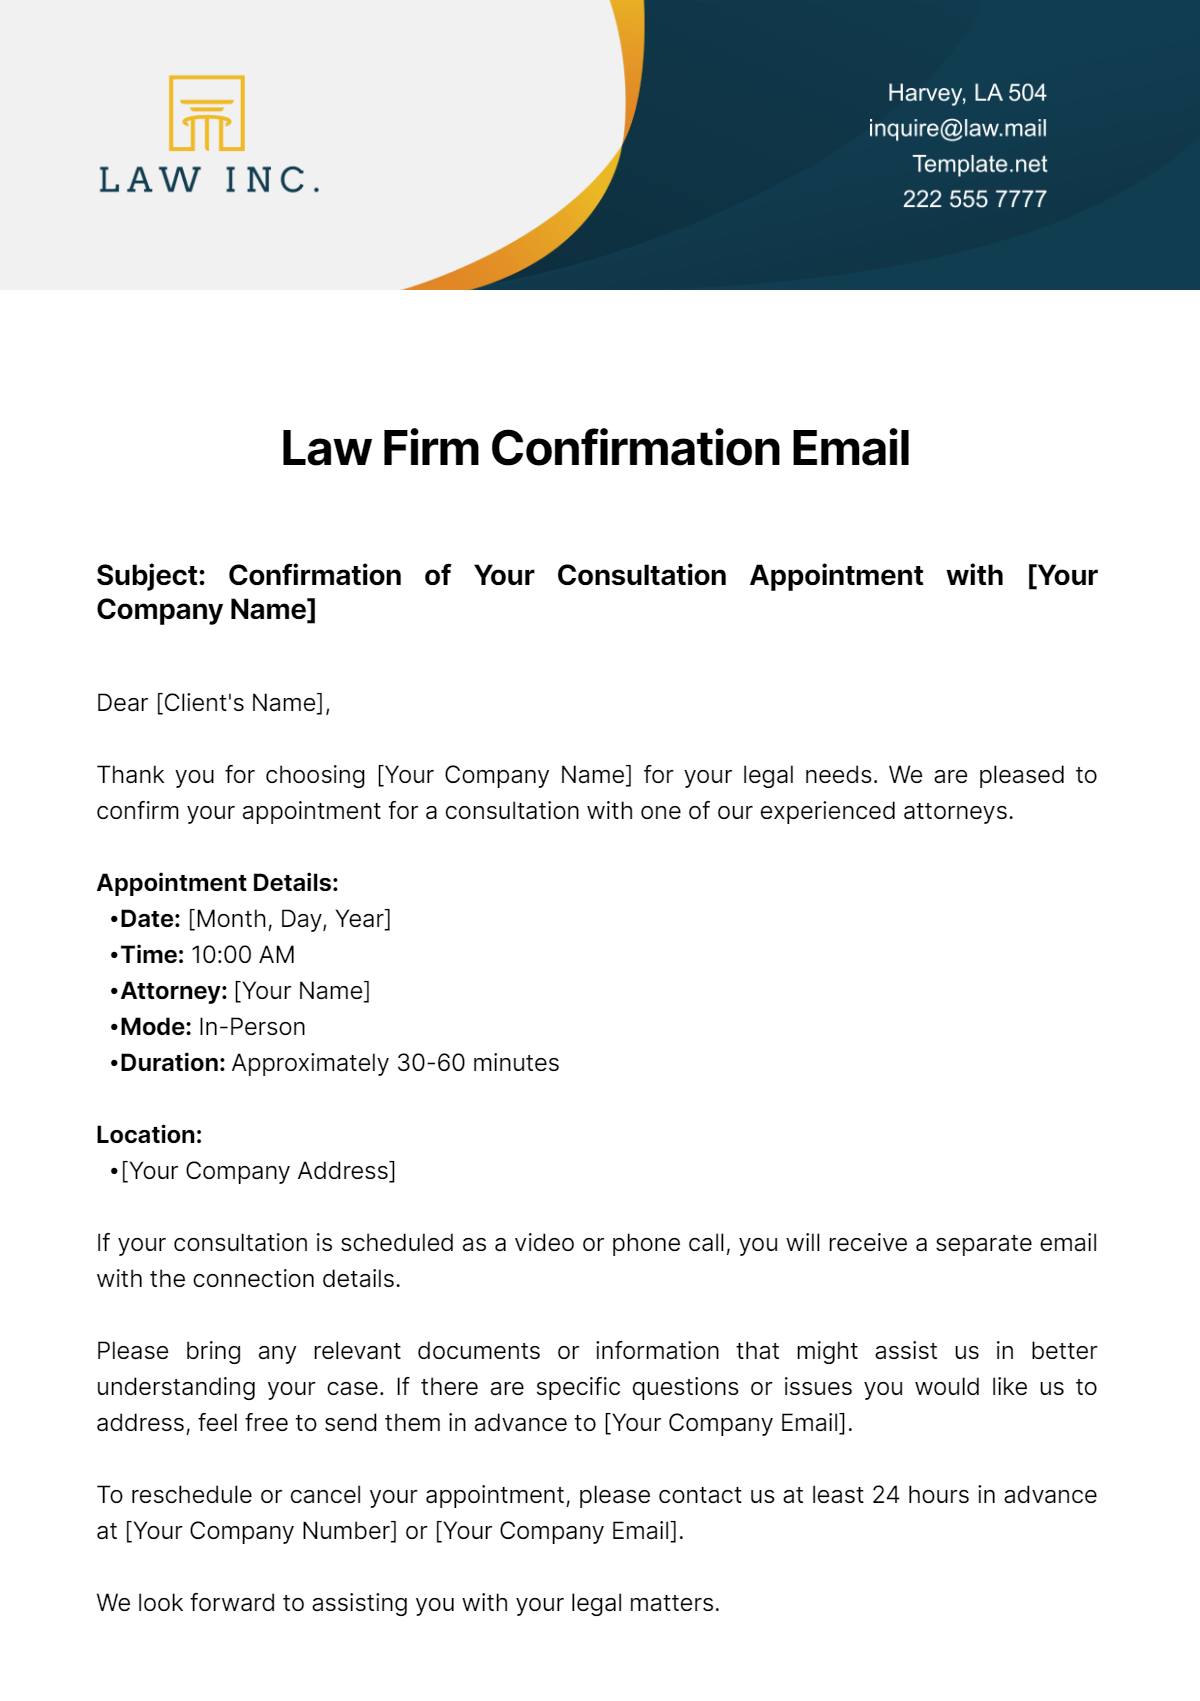 Law Firm Confirmation Email Template